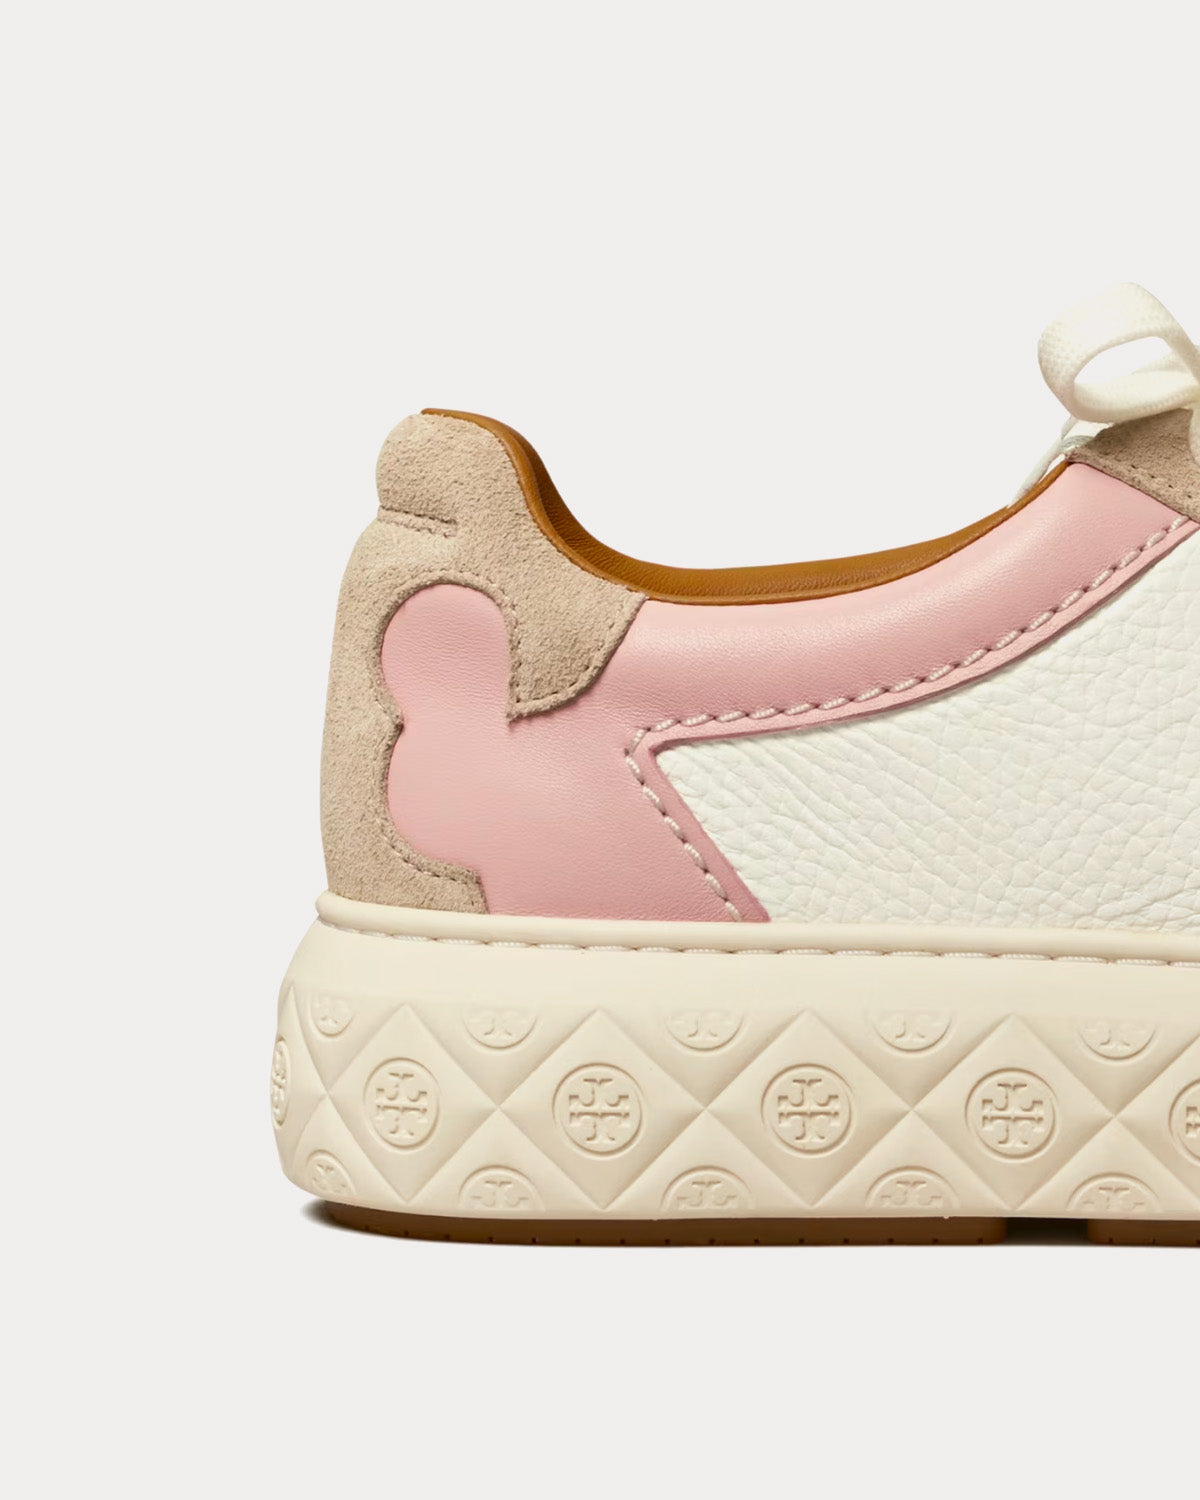 Tory Burch - Ladybug New Ivory / Calcare / Rosa Low Top Sneakers